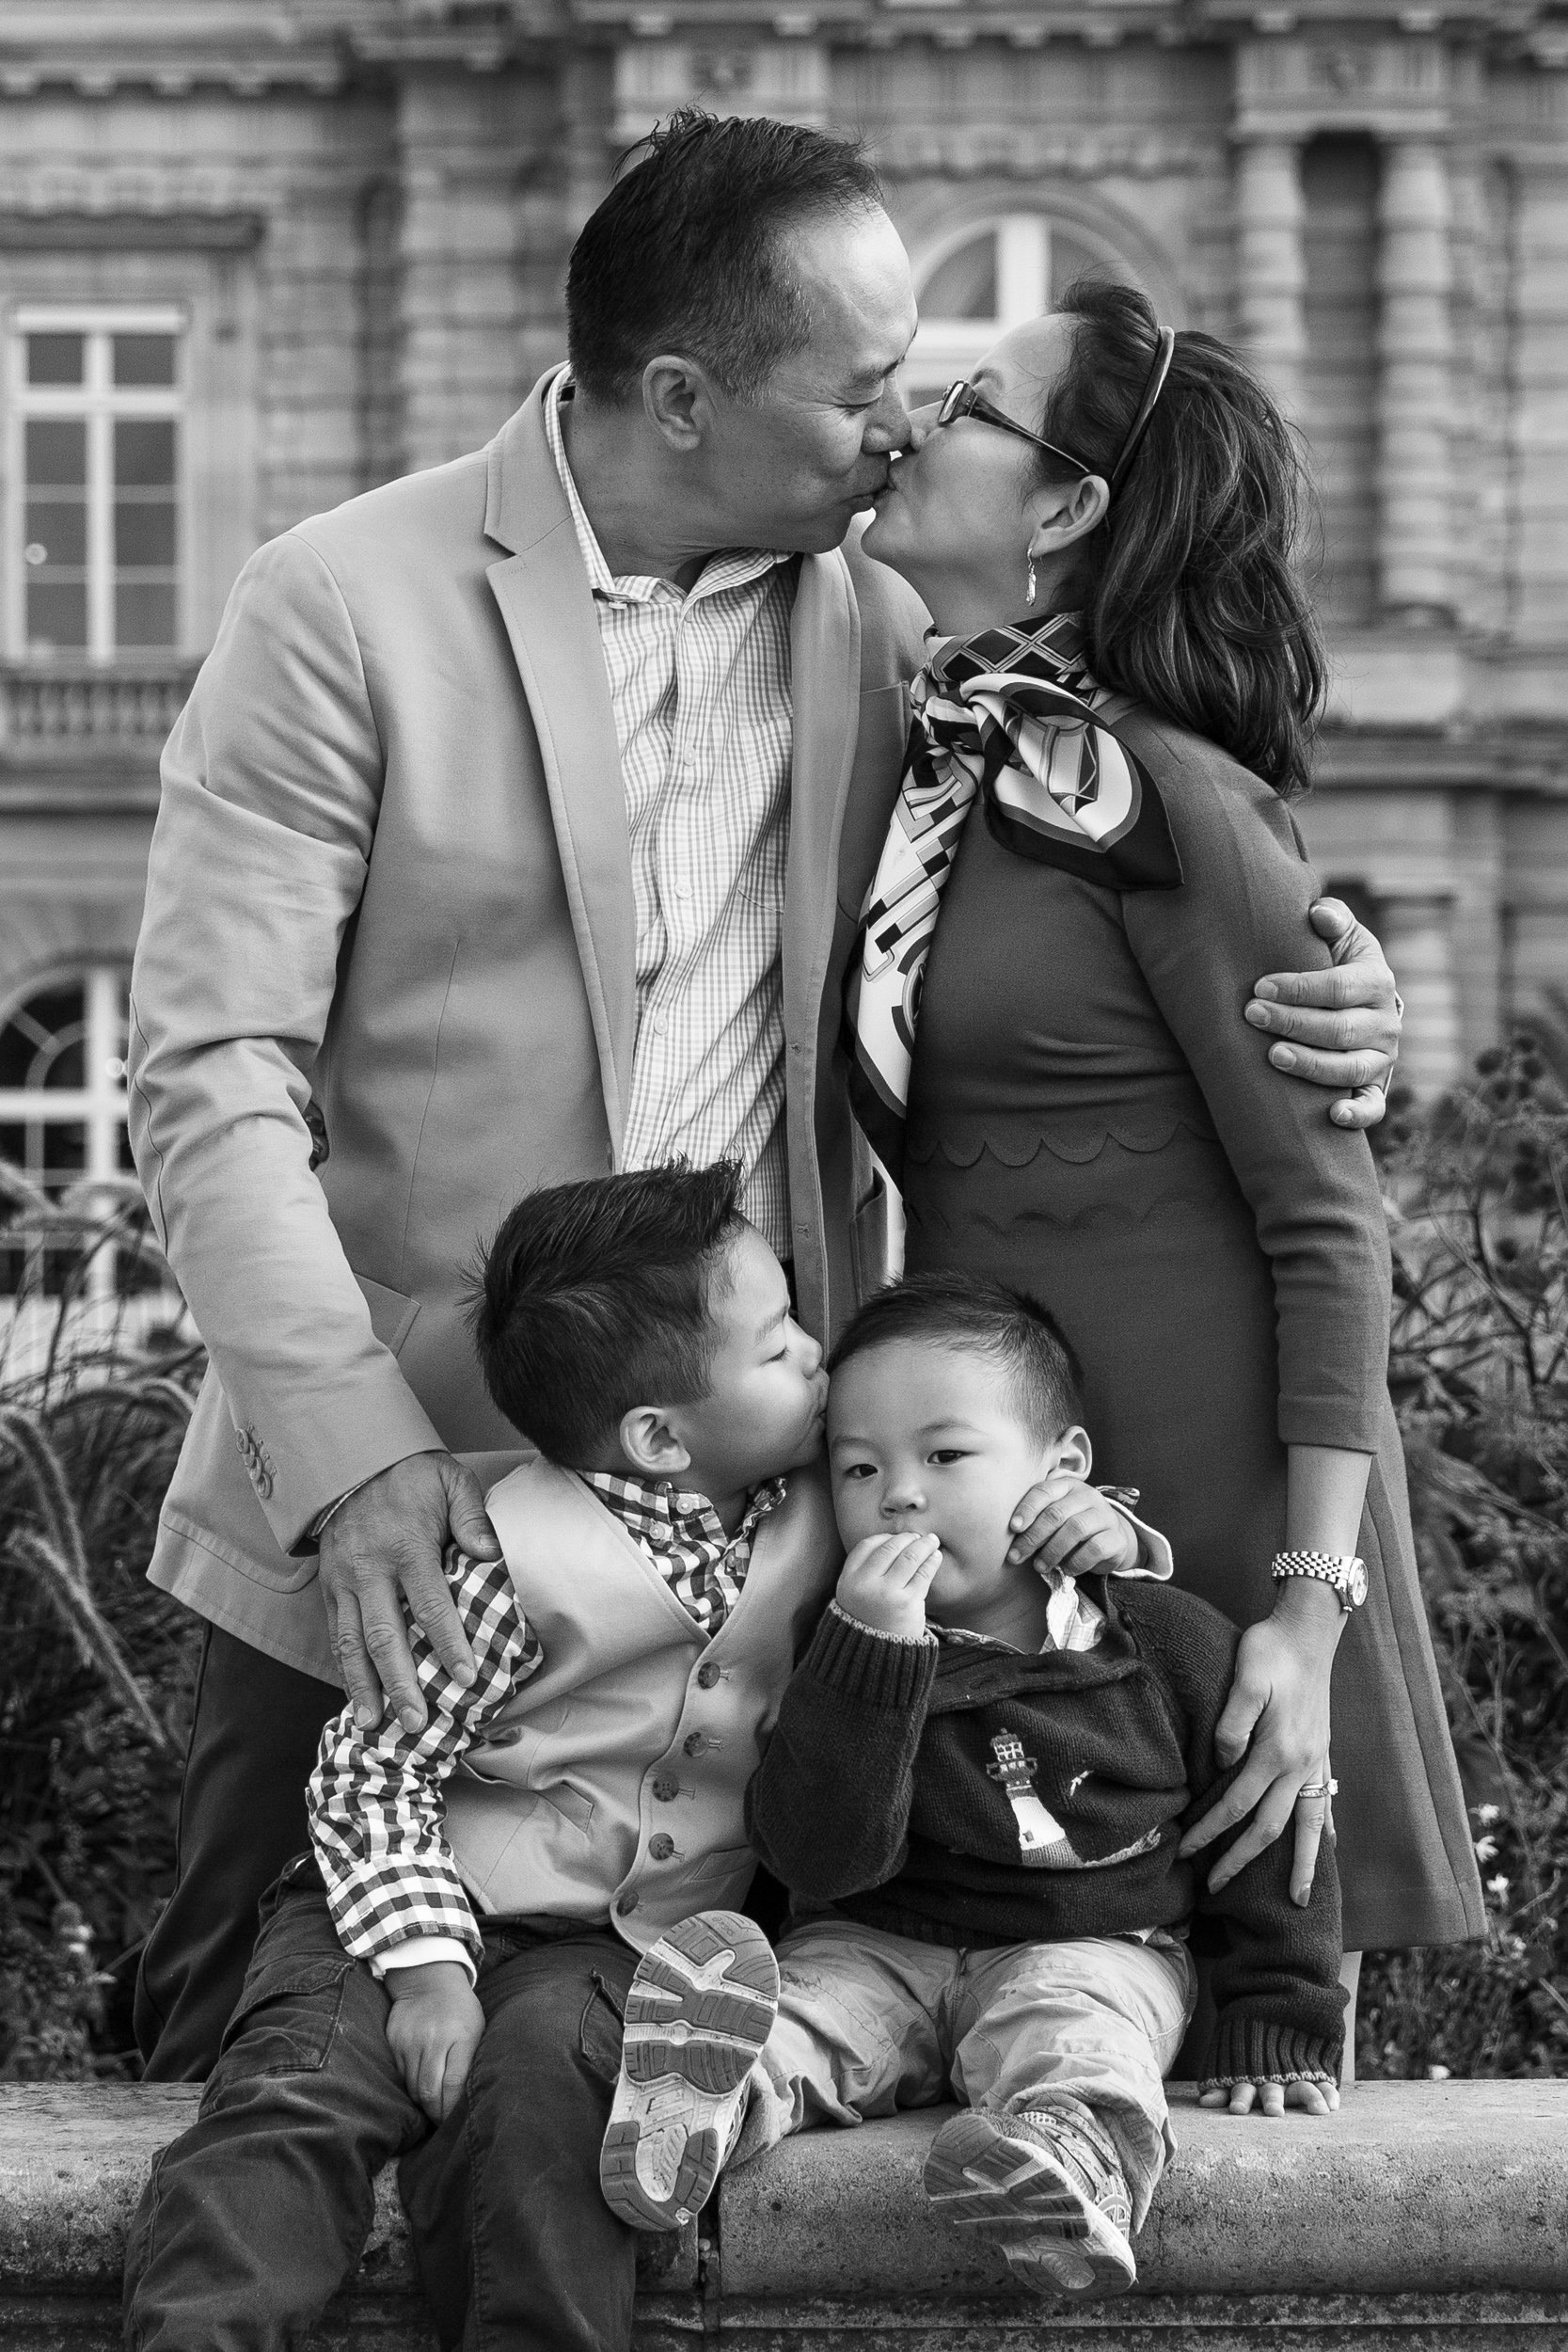  family-of-four-embrace-at-luxembourg-gardens 